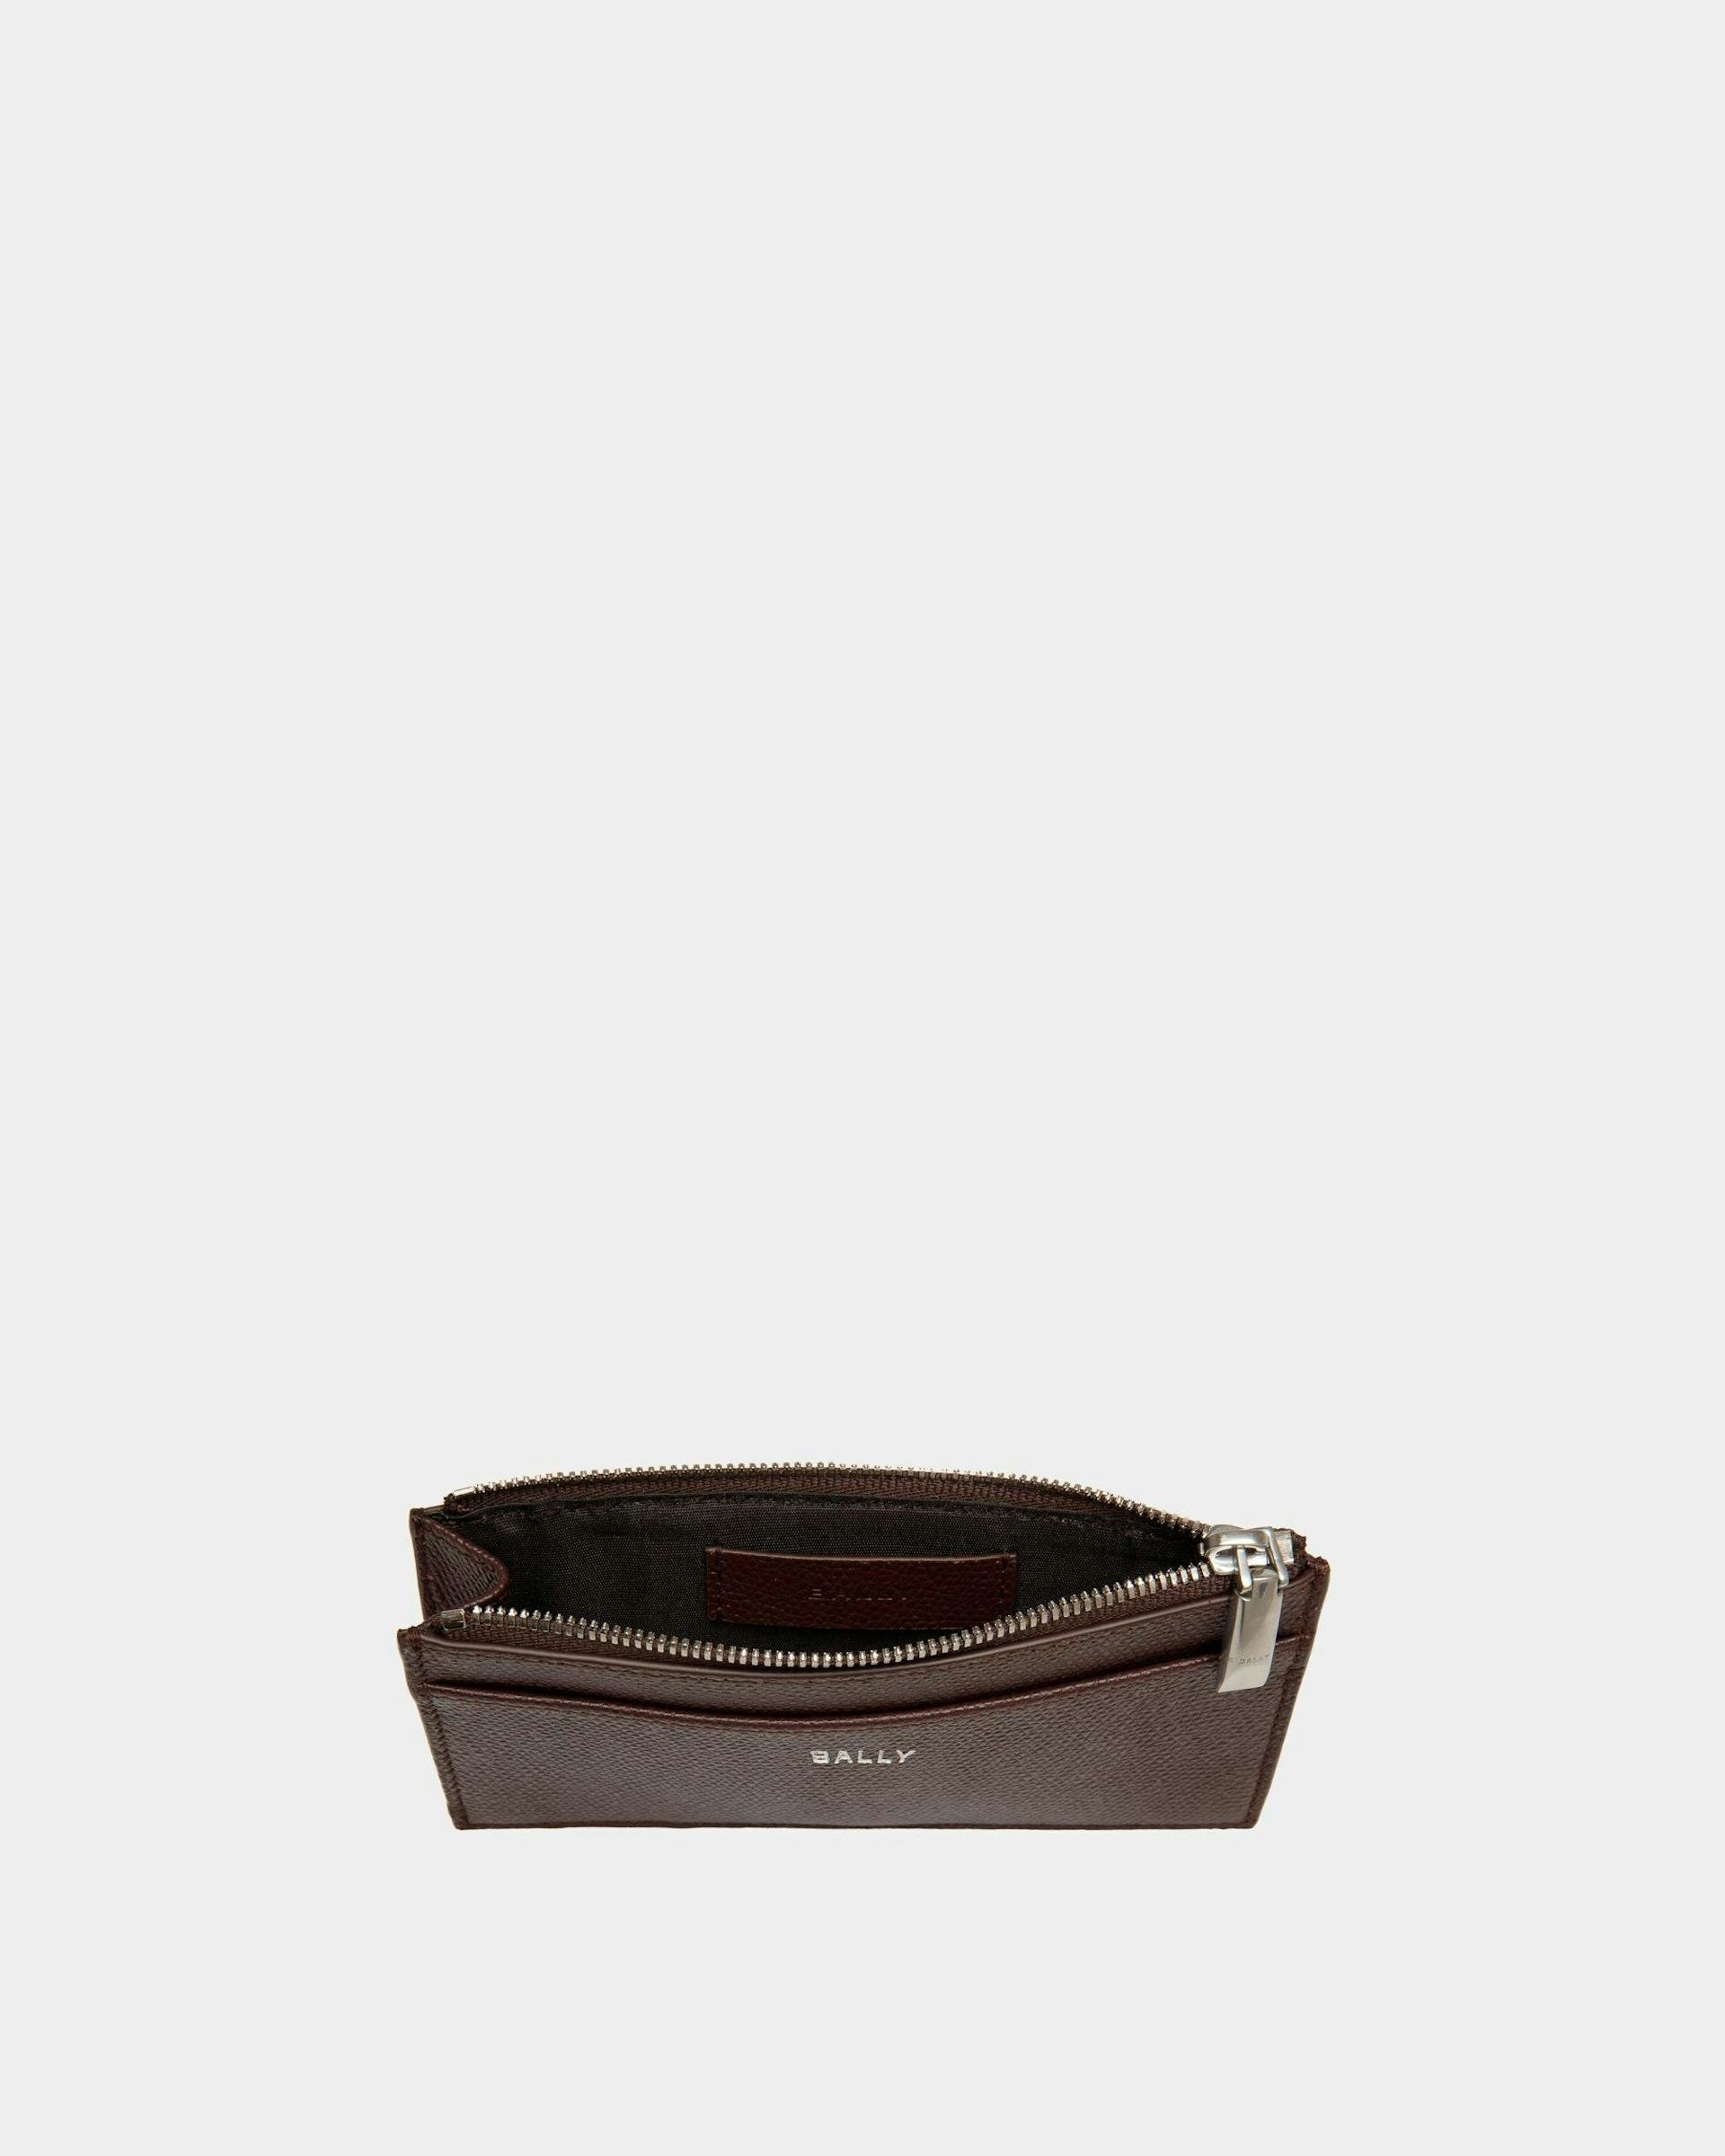 Men's Flag Coin Card Holder In Chestnut Brown And Red Embossed Leather | Bally | Still Life Open / Inside